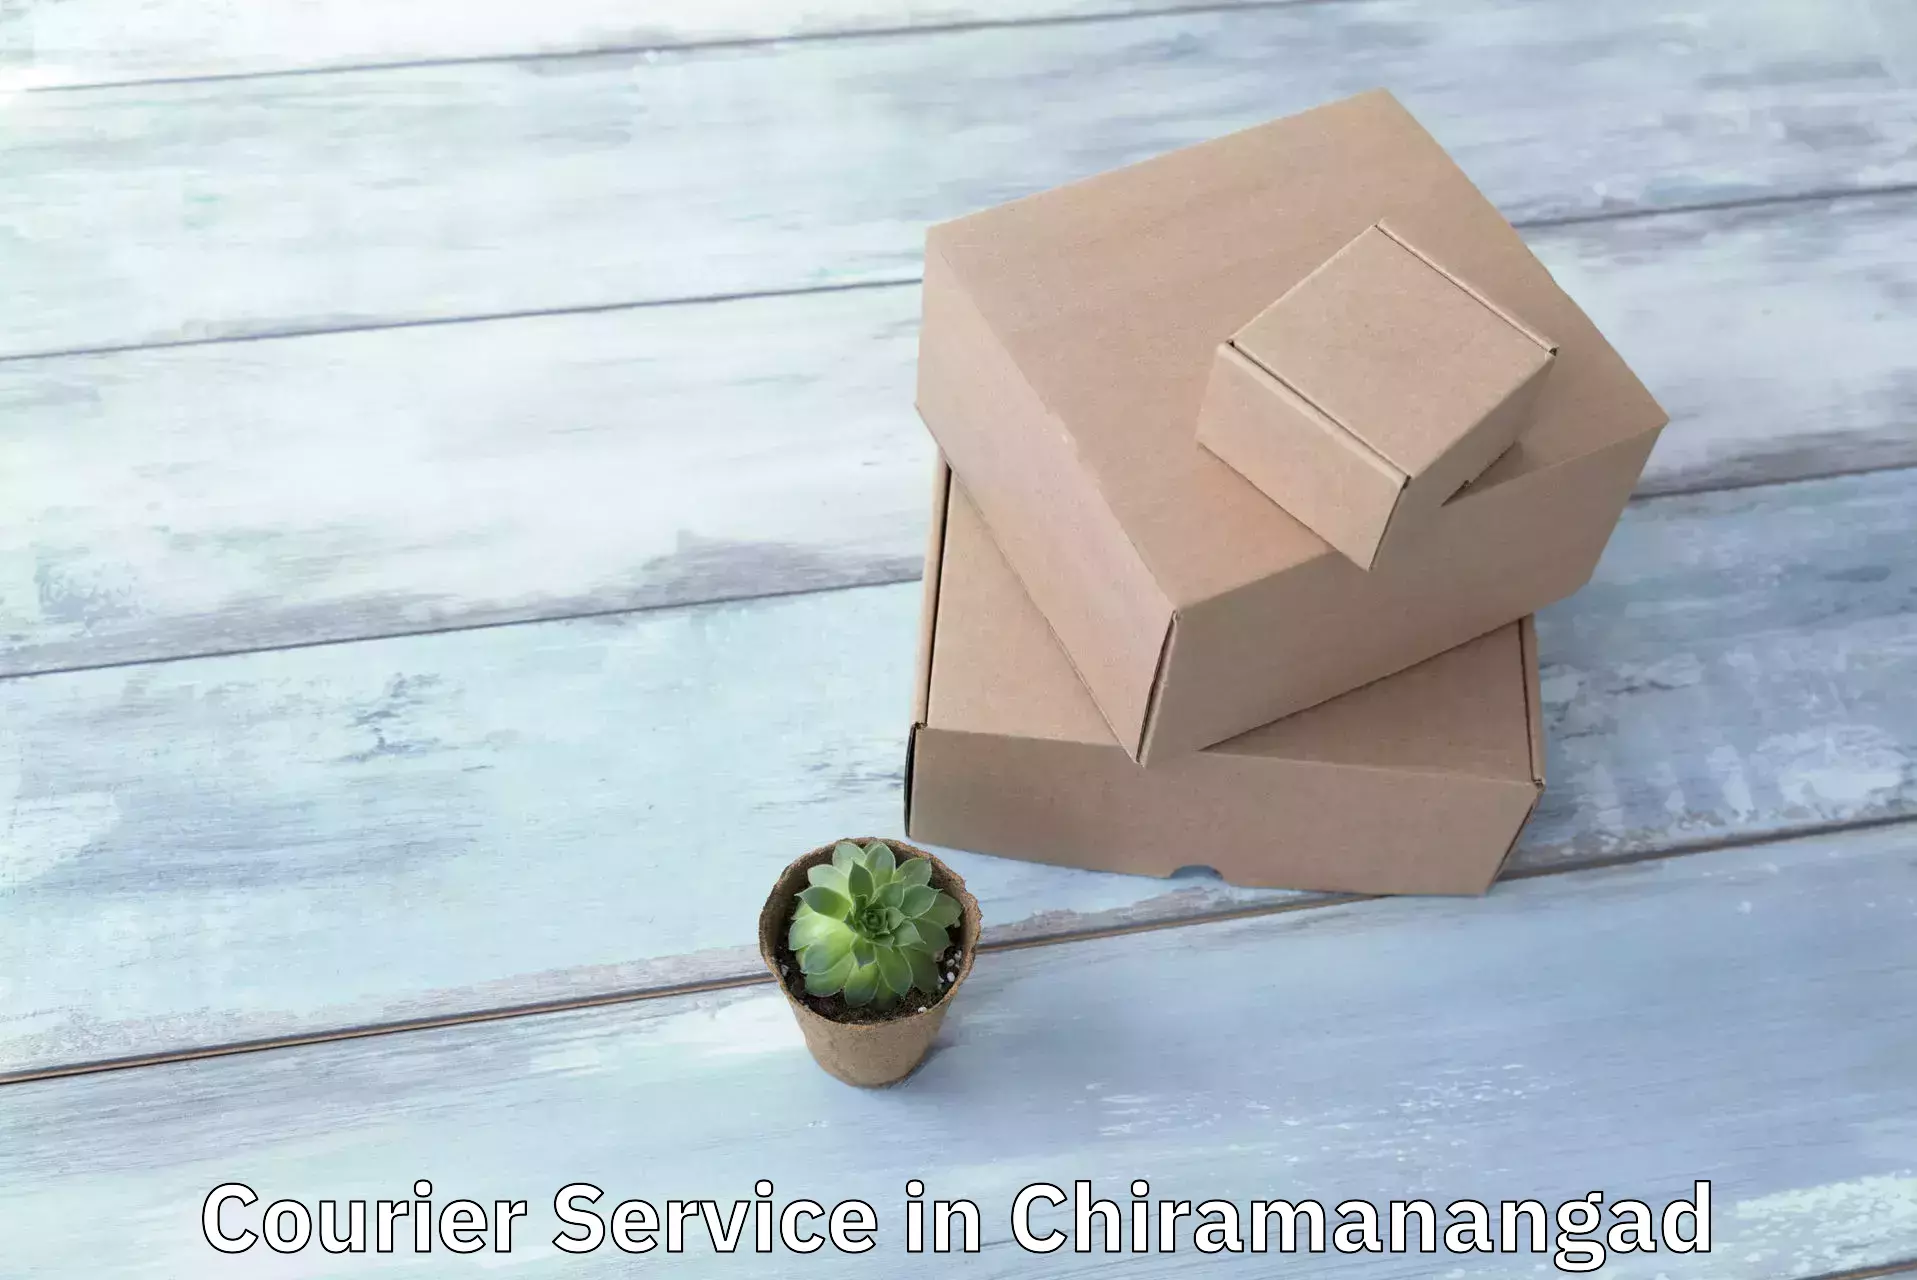 Personal parcel delivery in Chiramanangad